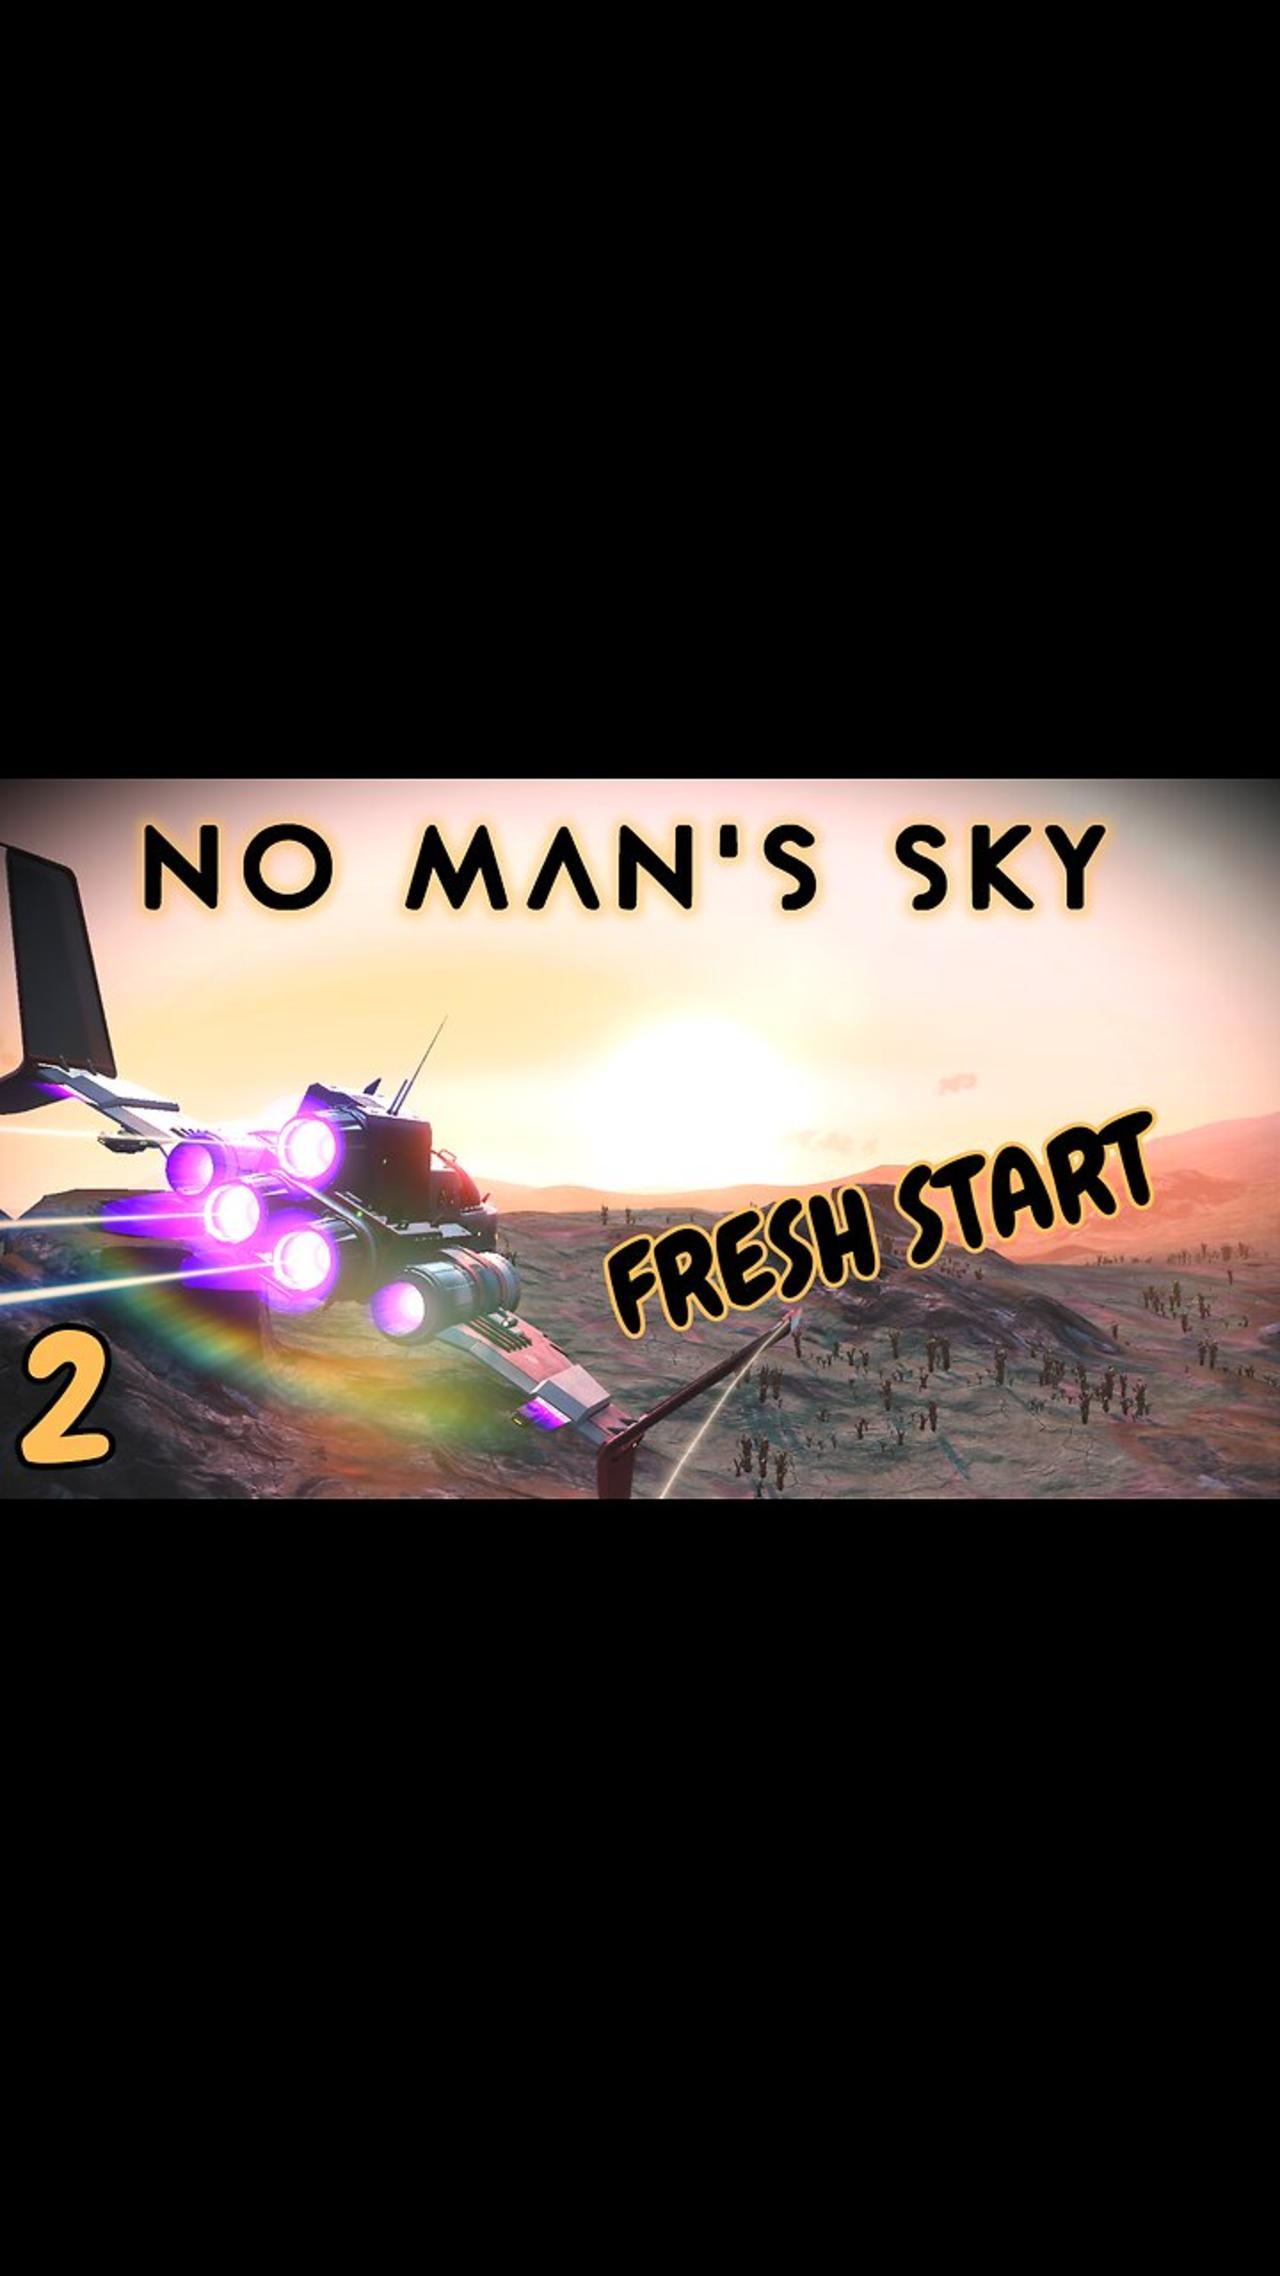 With So Many New Features. We Just Have To Start Over - No Man's Sky - 2